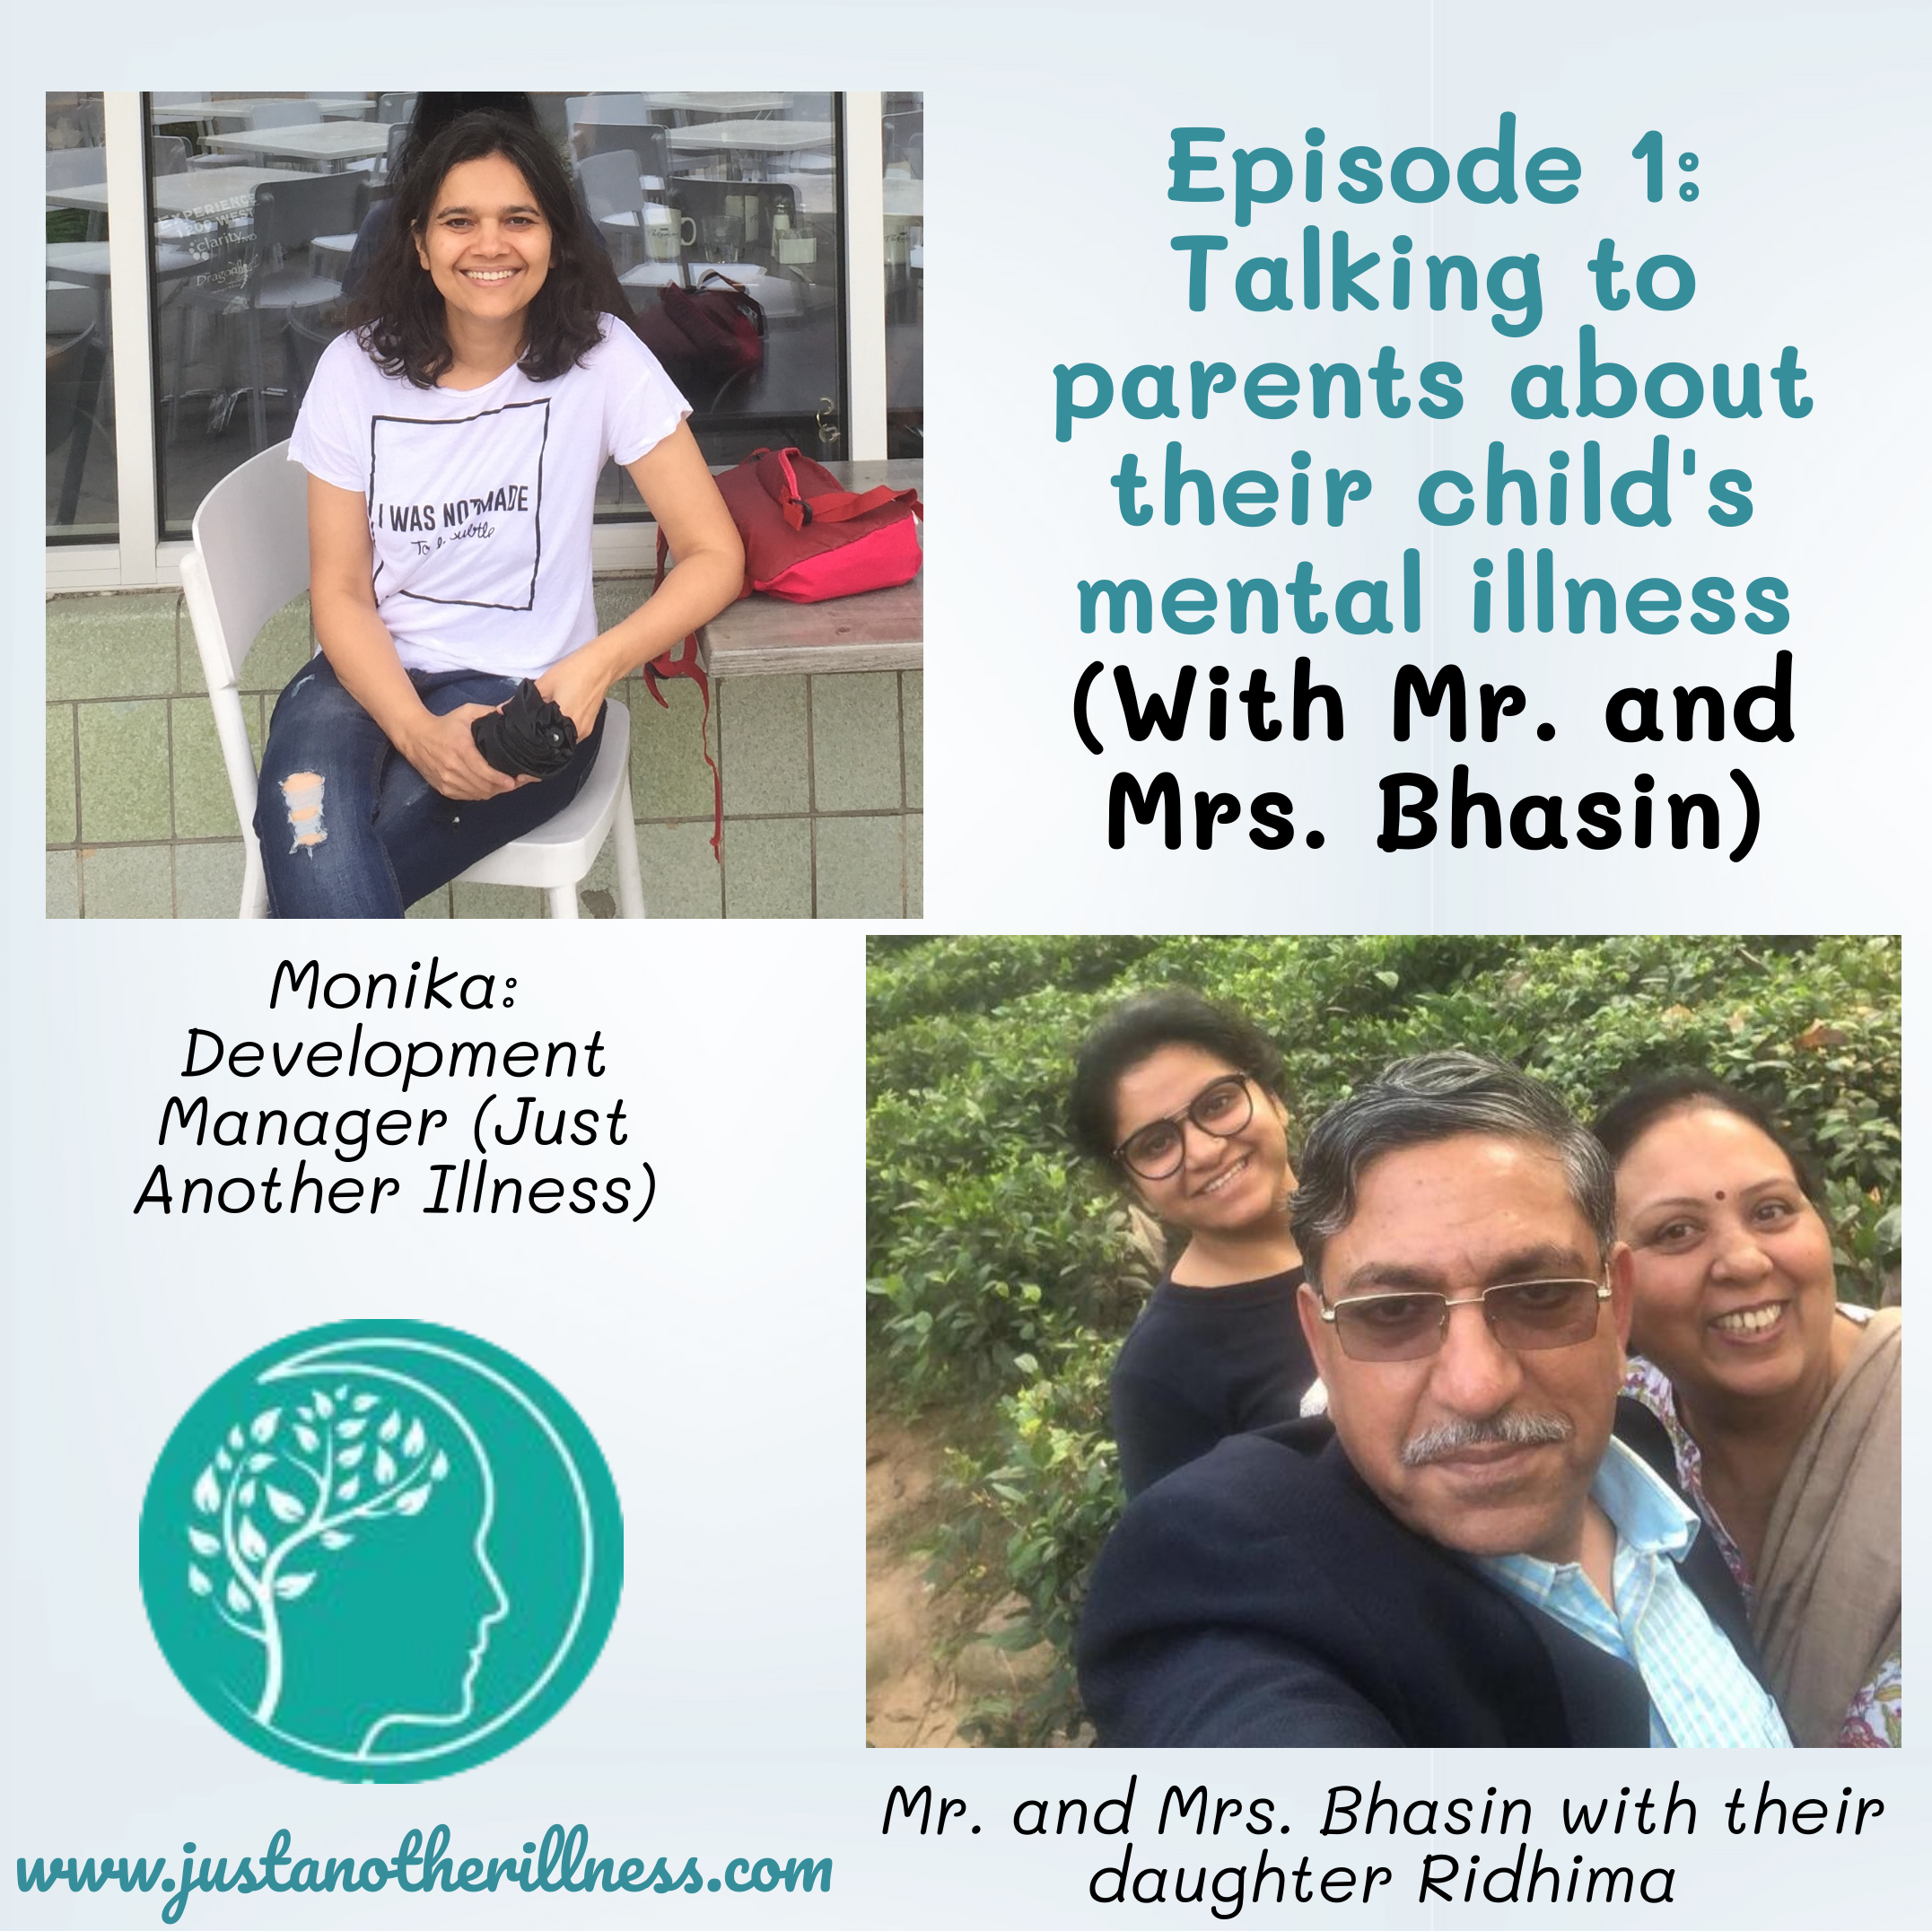 Talking to parents about their child's mental illness (Episode 1)